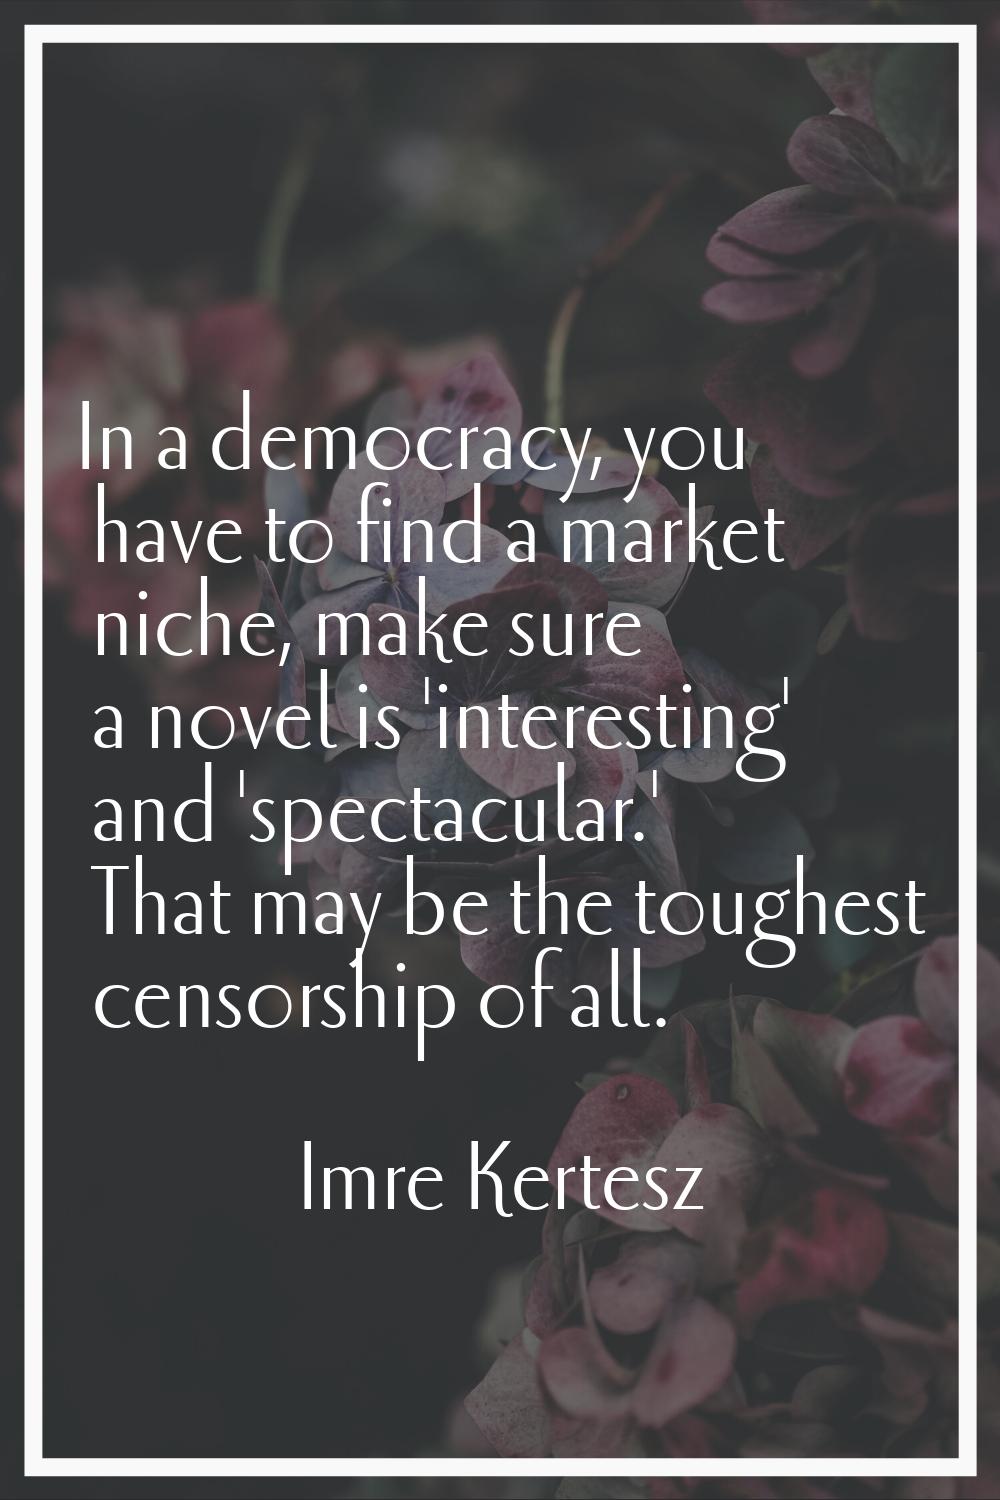 In a democracy, you have to find a market niche, make sure a novel is 'interesting' and 'spectacula